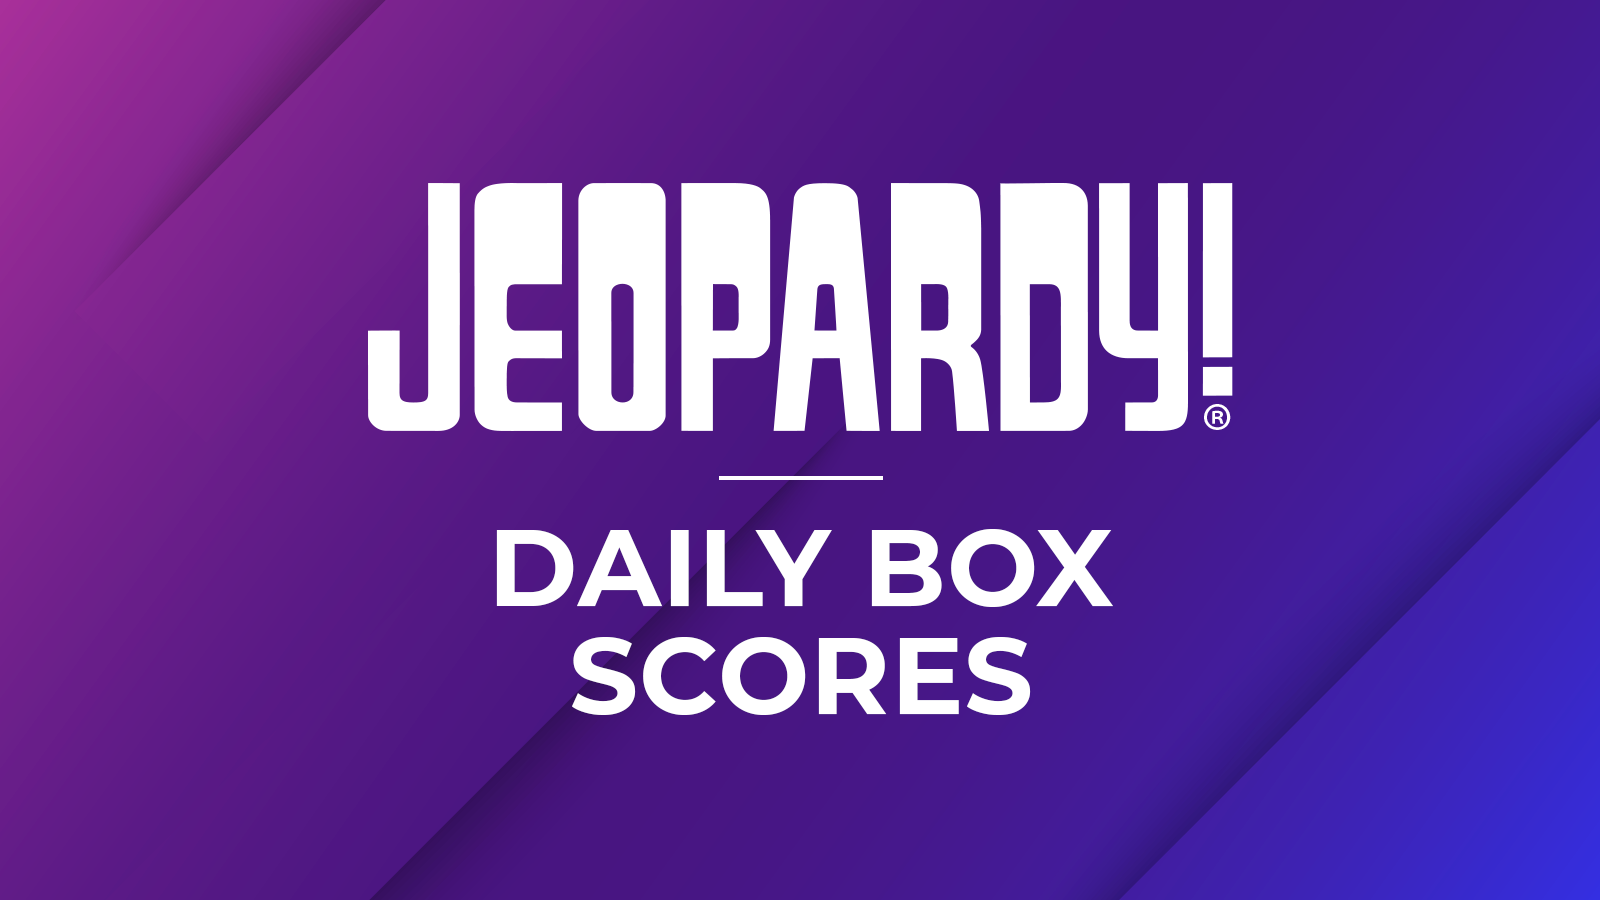 This image says Jeopardy! Daily Box Scores 